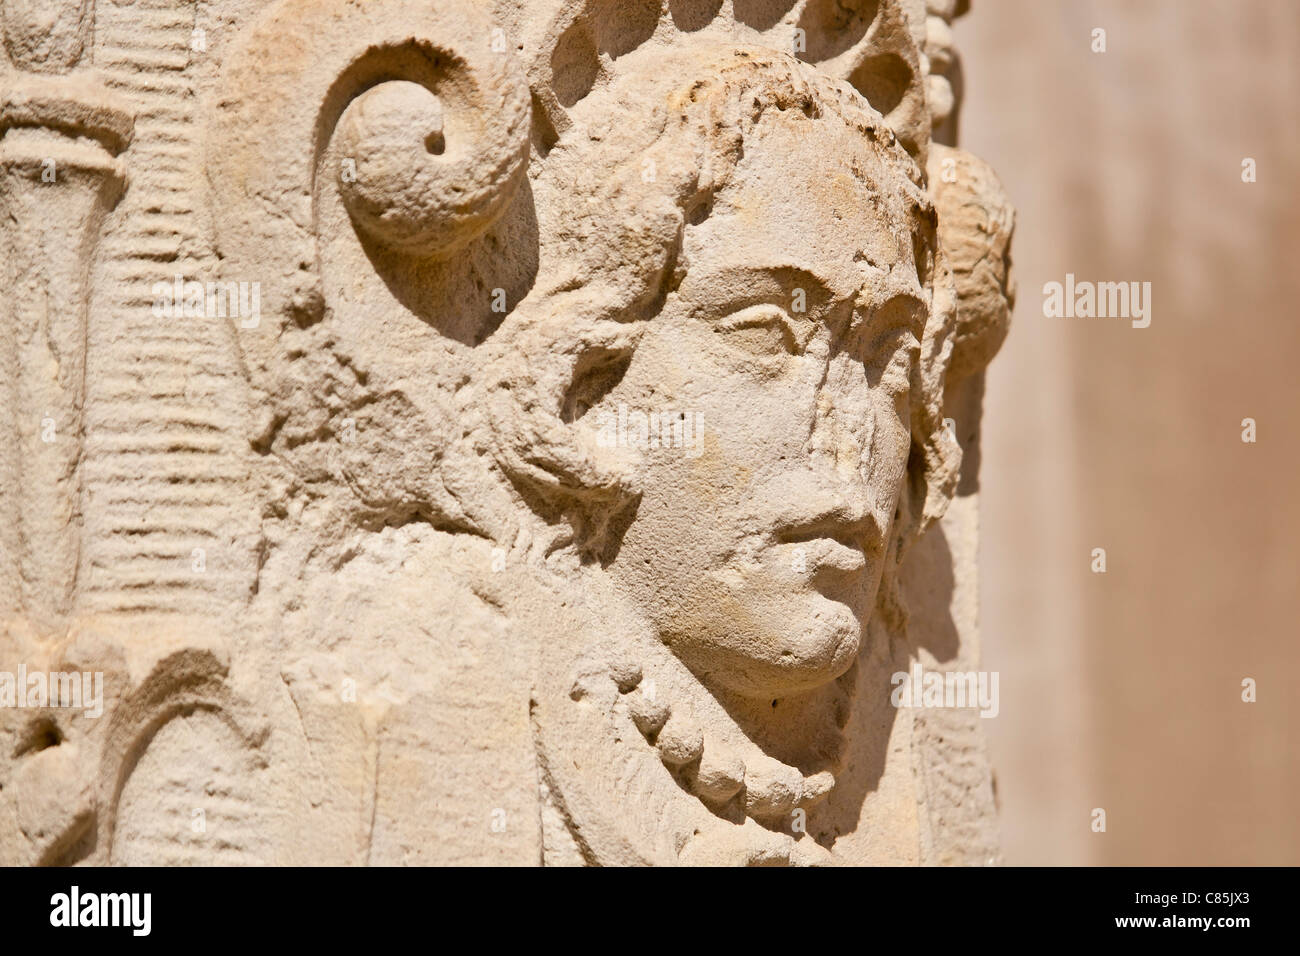 Decorative relief head, New Palace in Fuerst-Pueckler-Park, Bad Muskau, Germany. Stock Photo